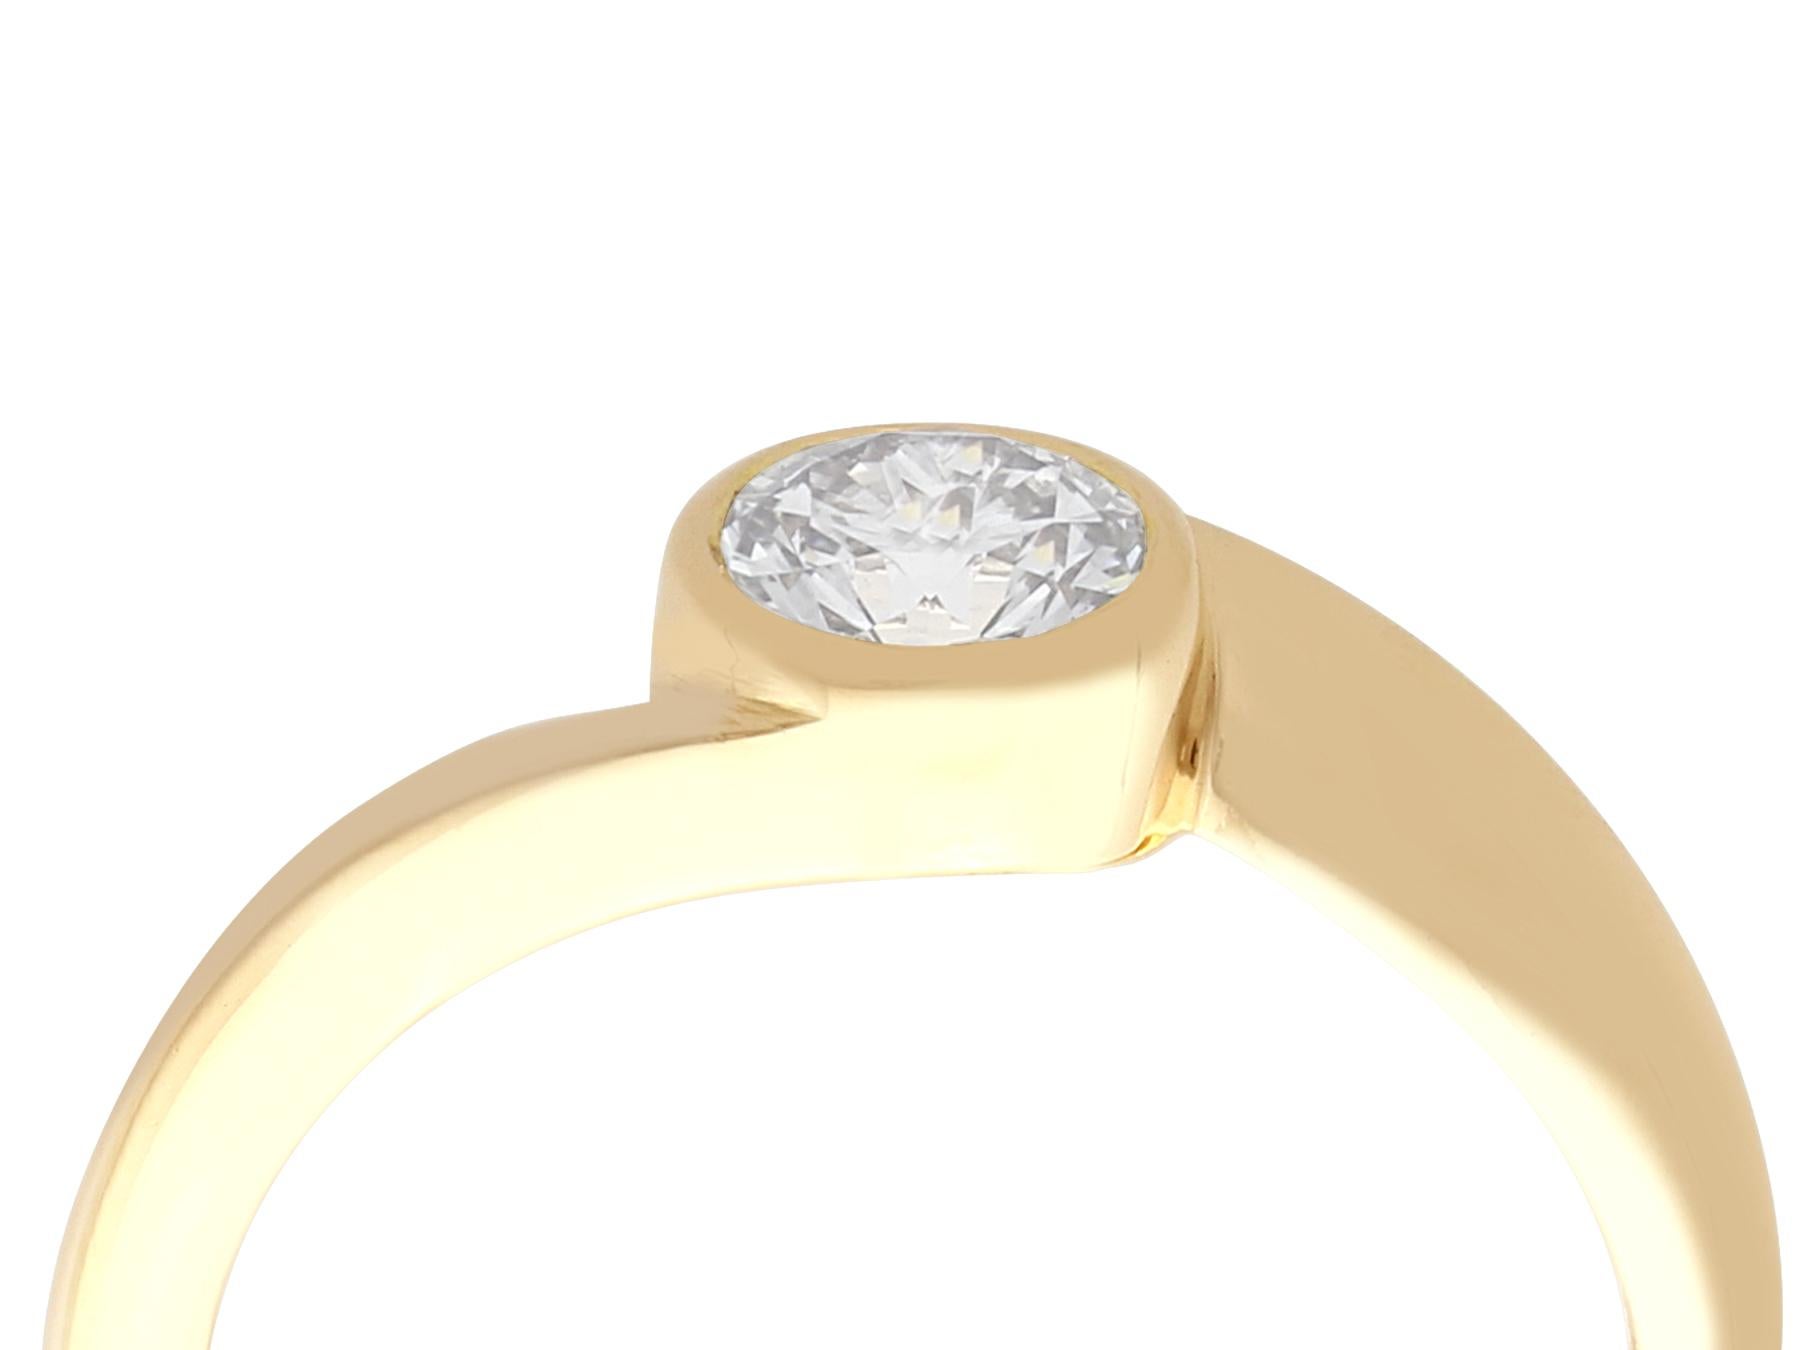 A fine and impressive vintage French 0.51 carat diamond and 18 karat yellow gold solitaire twist ring; part of our diverse jewelry and estate jewelry collections.

This fine and impressive vintage engagement ring has been crafted in 18k yellow